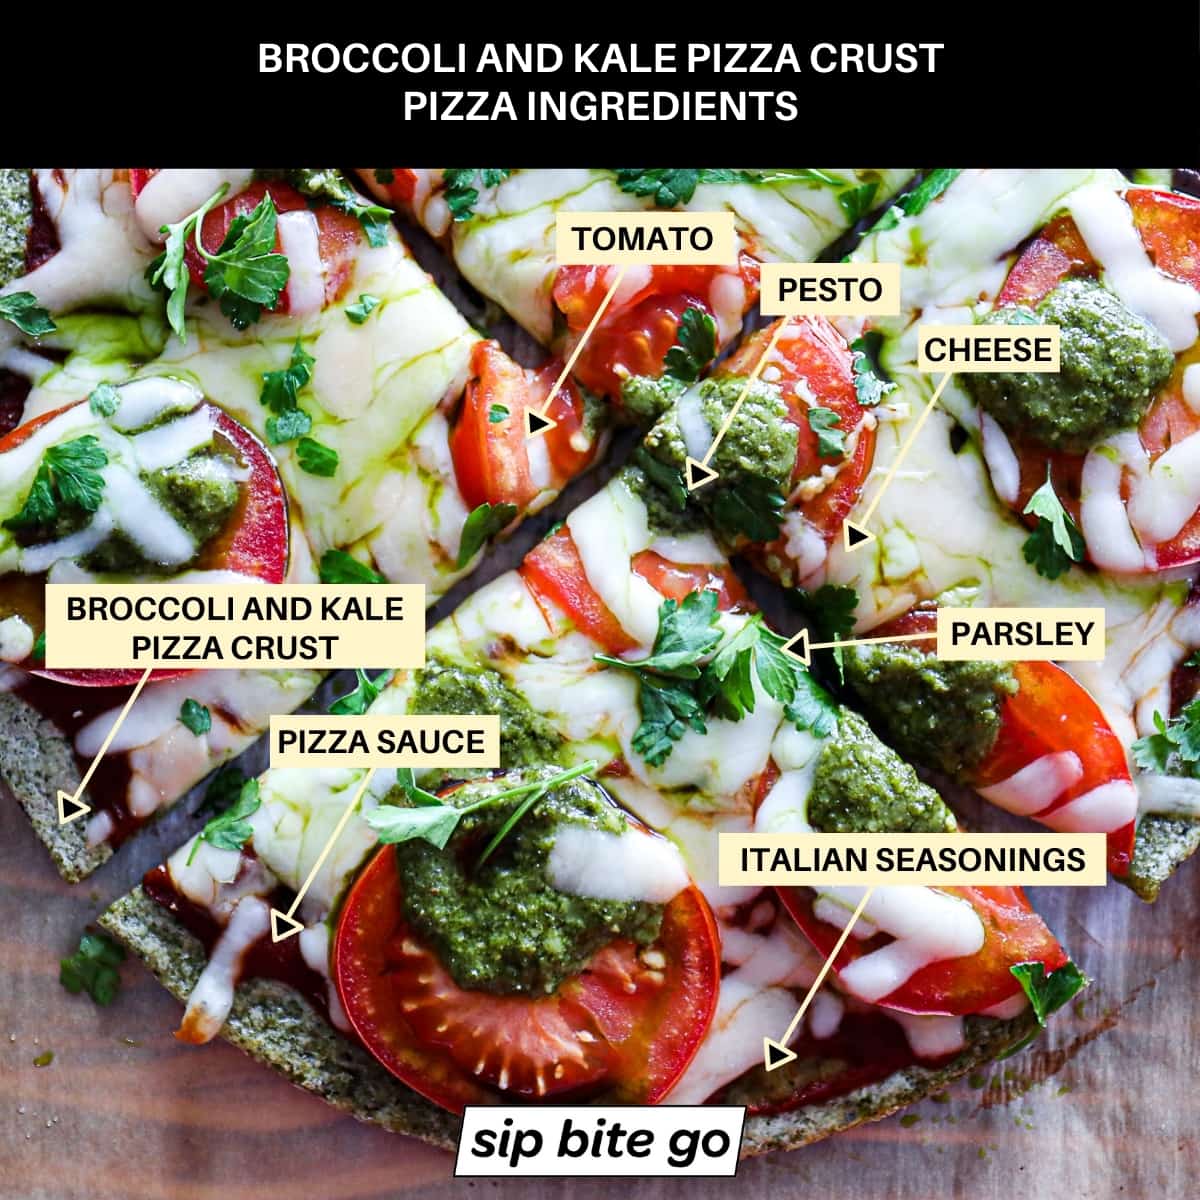 Image with text overlay of gluten free pizza ingredients.